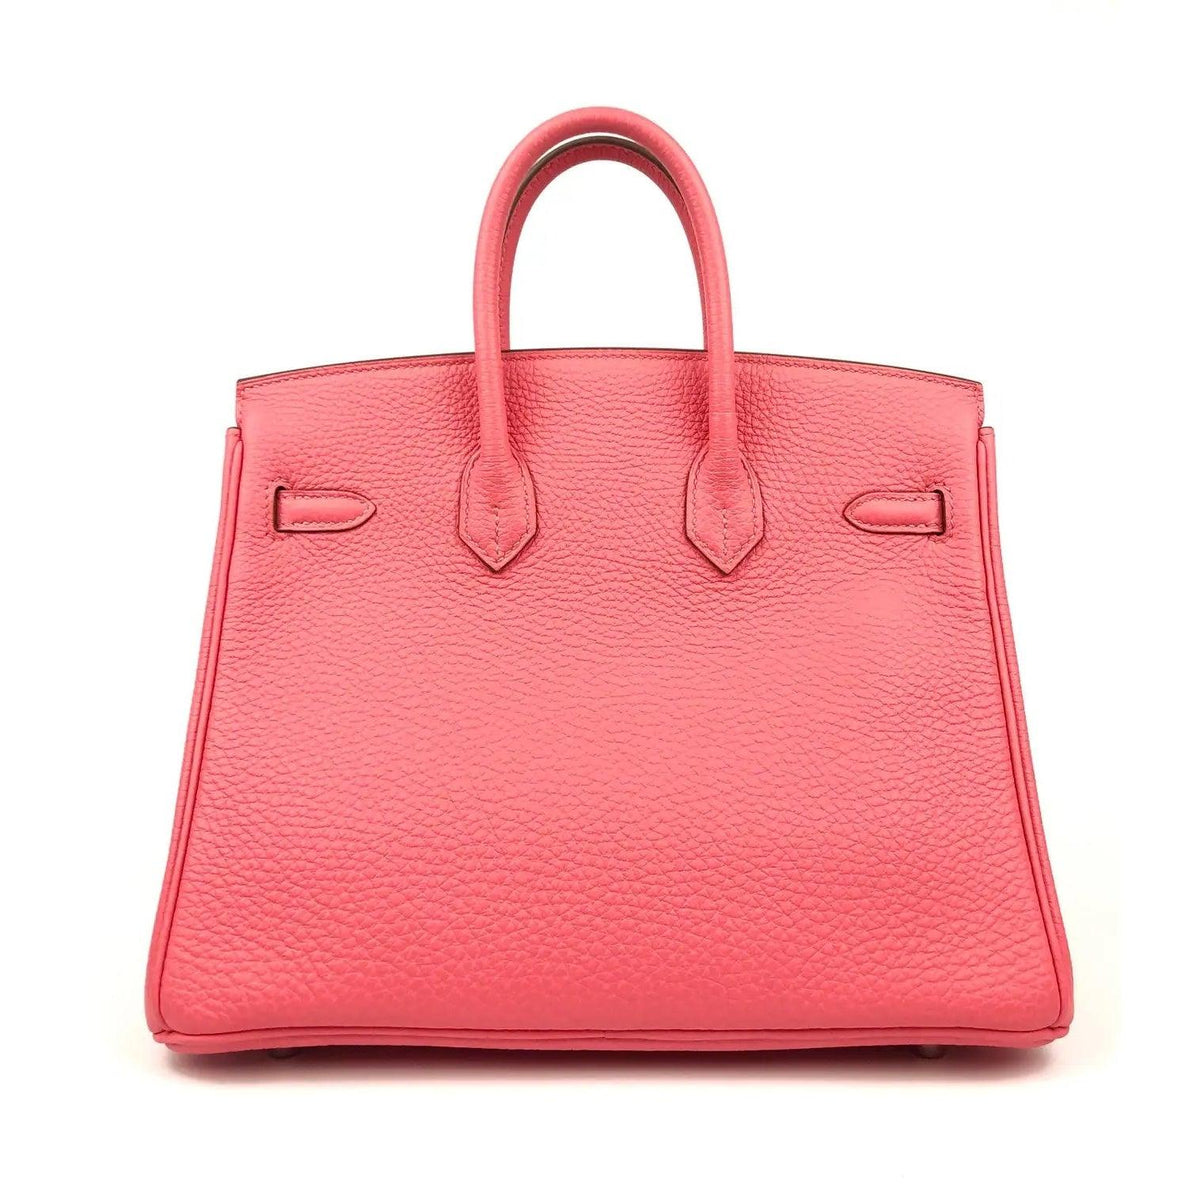 Pre-owned Rare HERMES Birkin 25 Rose Lipstick Pink Togo Leather Bag - theREMODA